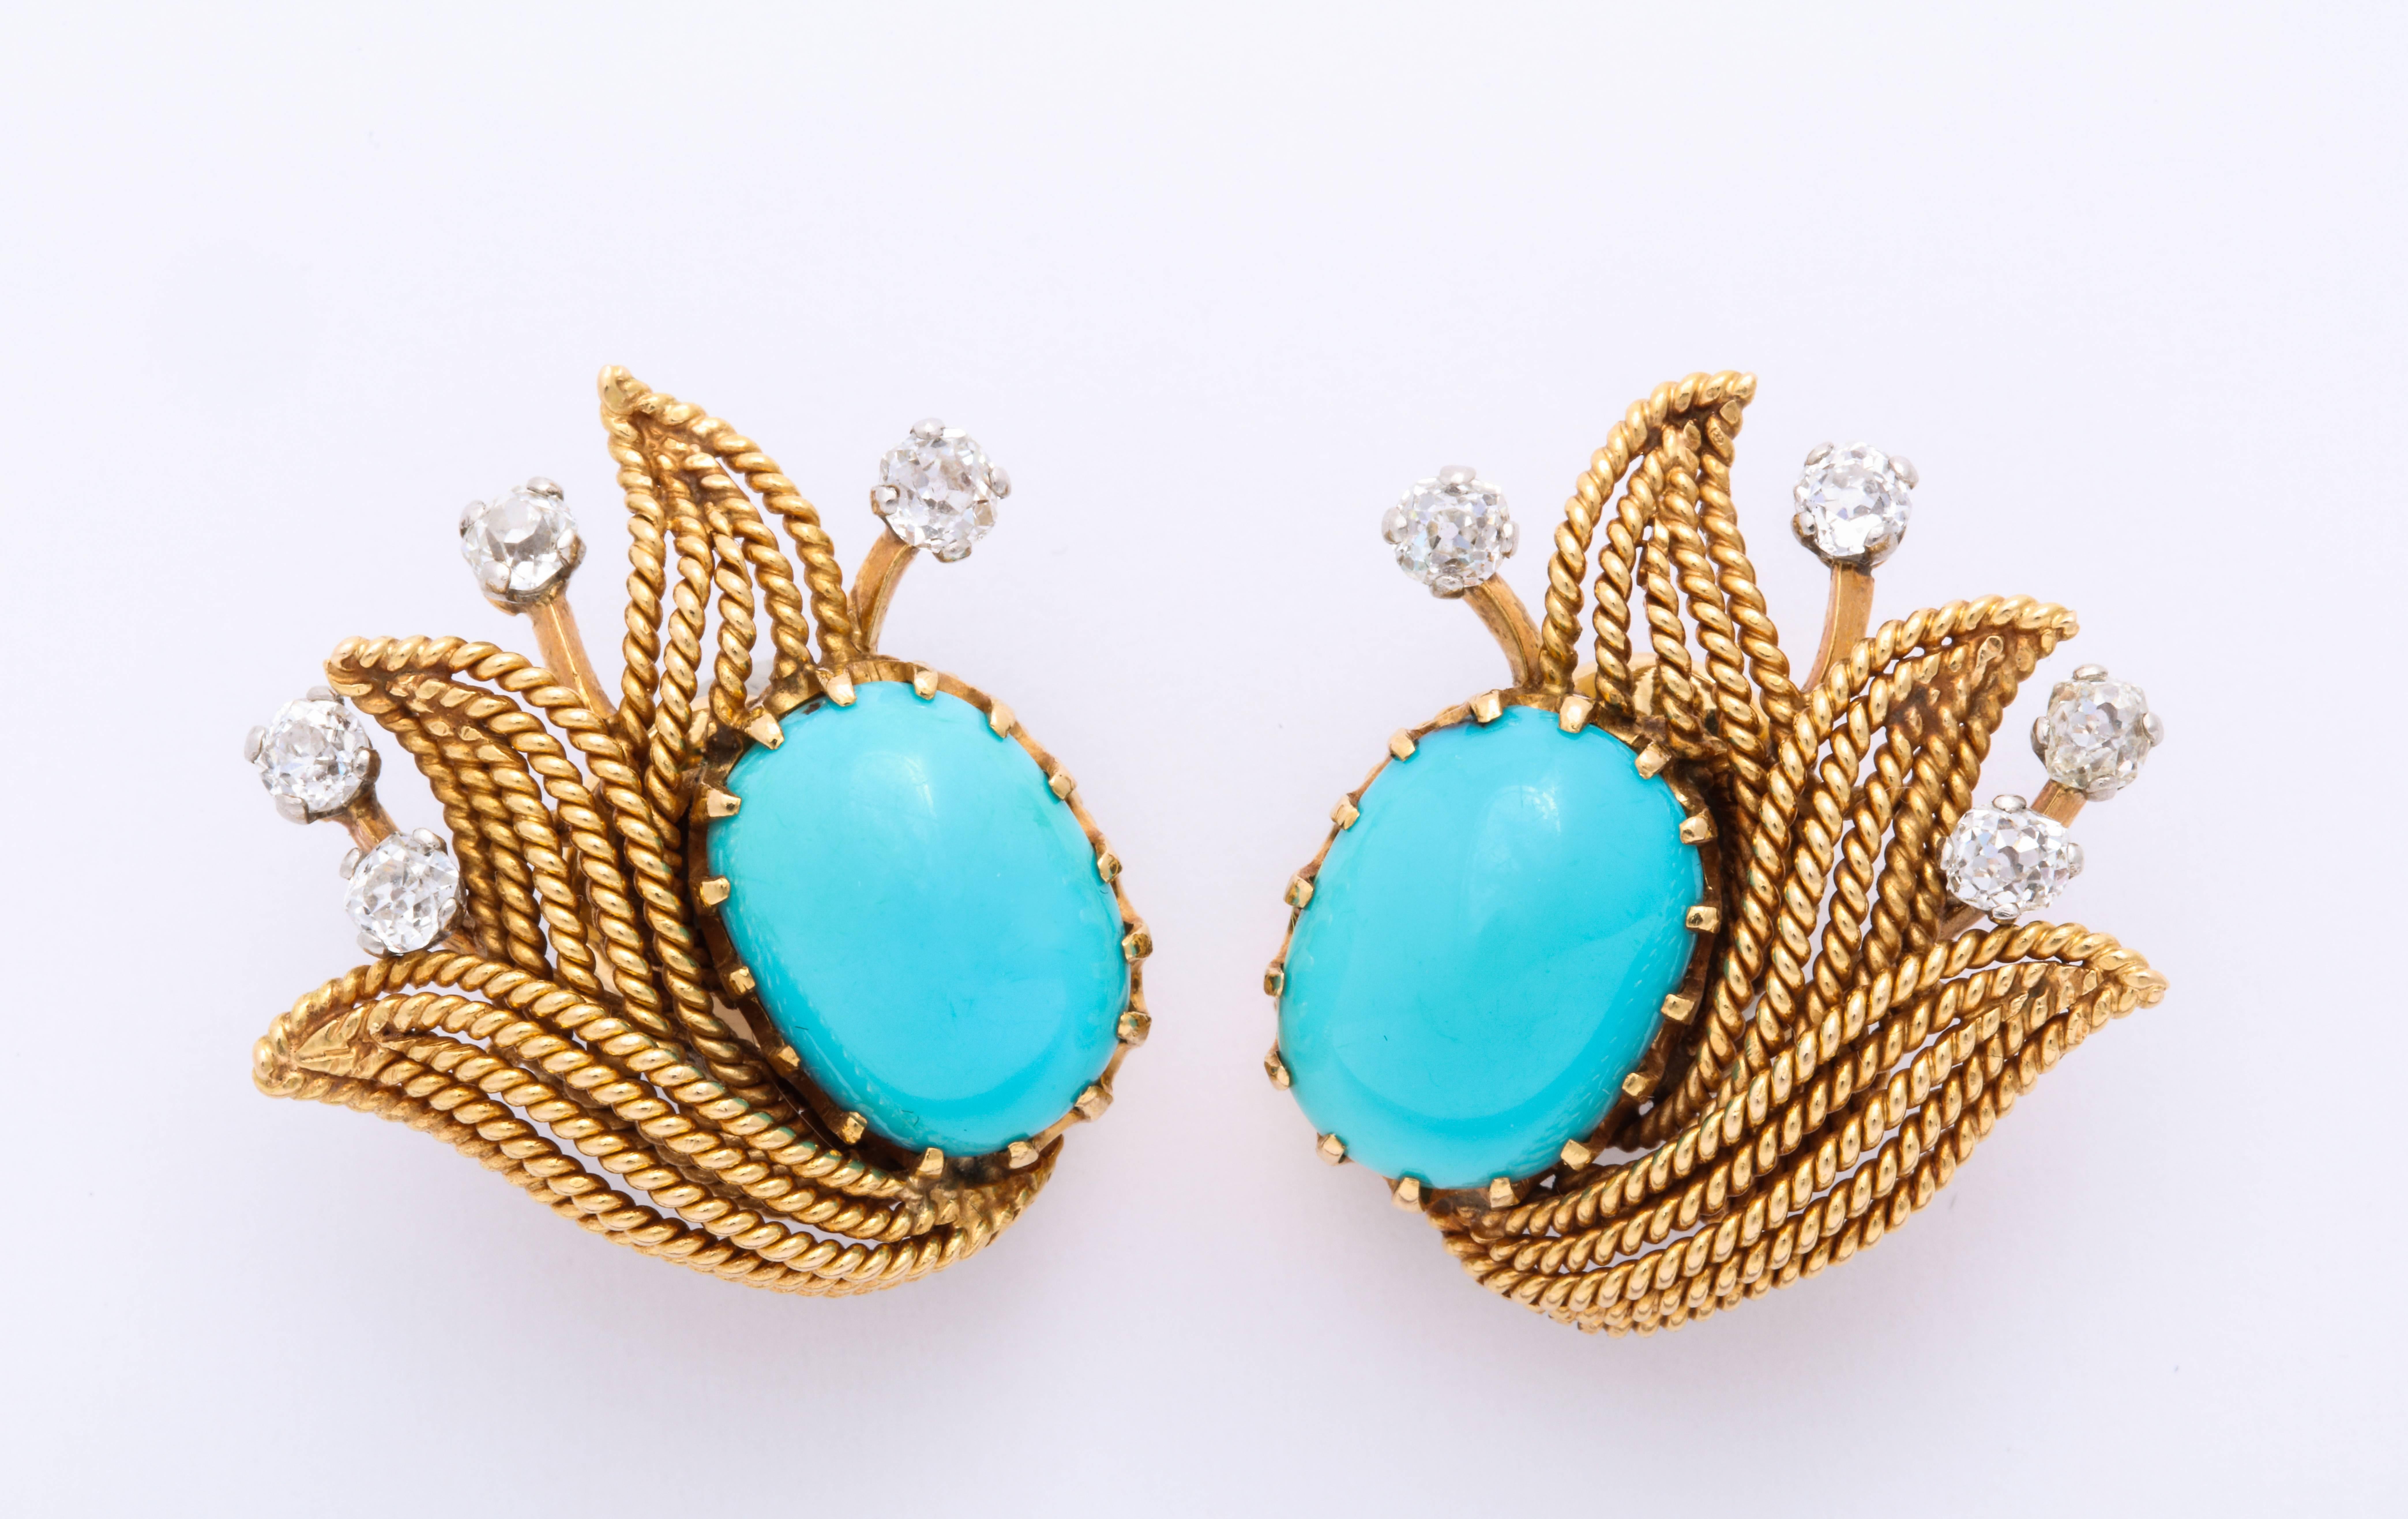 Pair of retro-era earrings featuring turquoise and diamond. The turquoise measures 13.46x9.84mm. There are 8 old cut diamonds with a total estimate weight of 0.96 carats. Set in 18 karat textured yellow gold. Circa 1940s-1950s. 